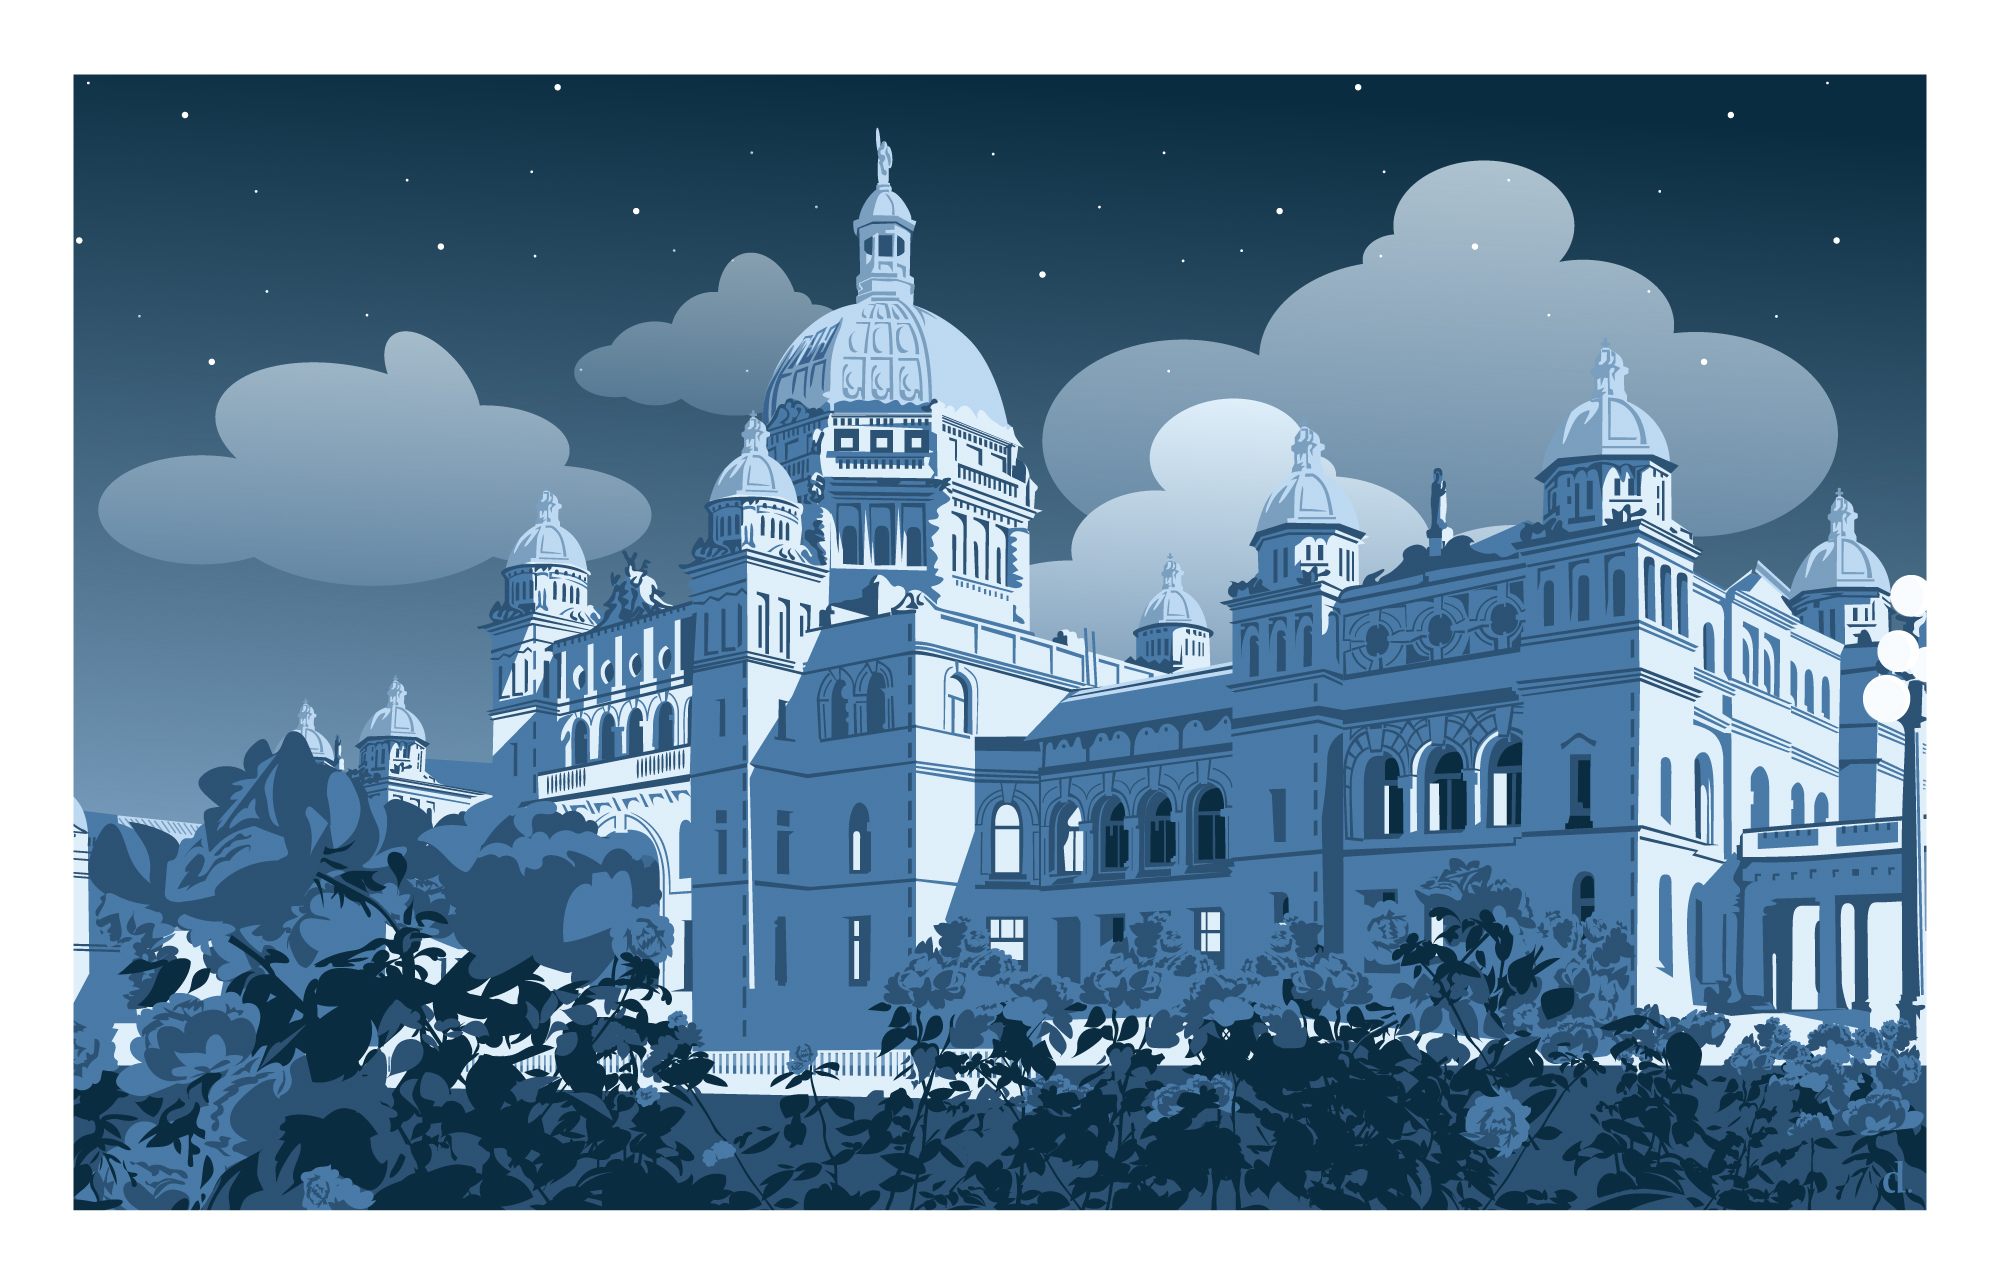 dlee illustration of the BC Parliament Buildings